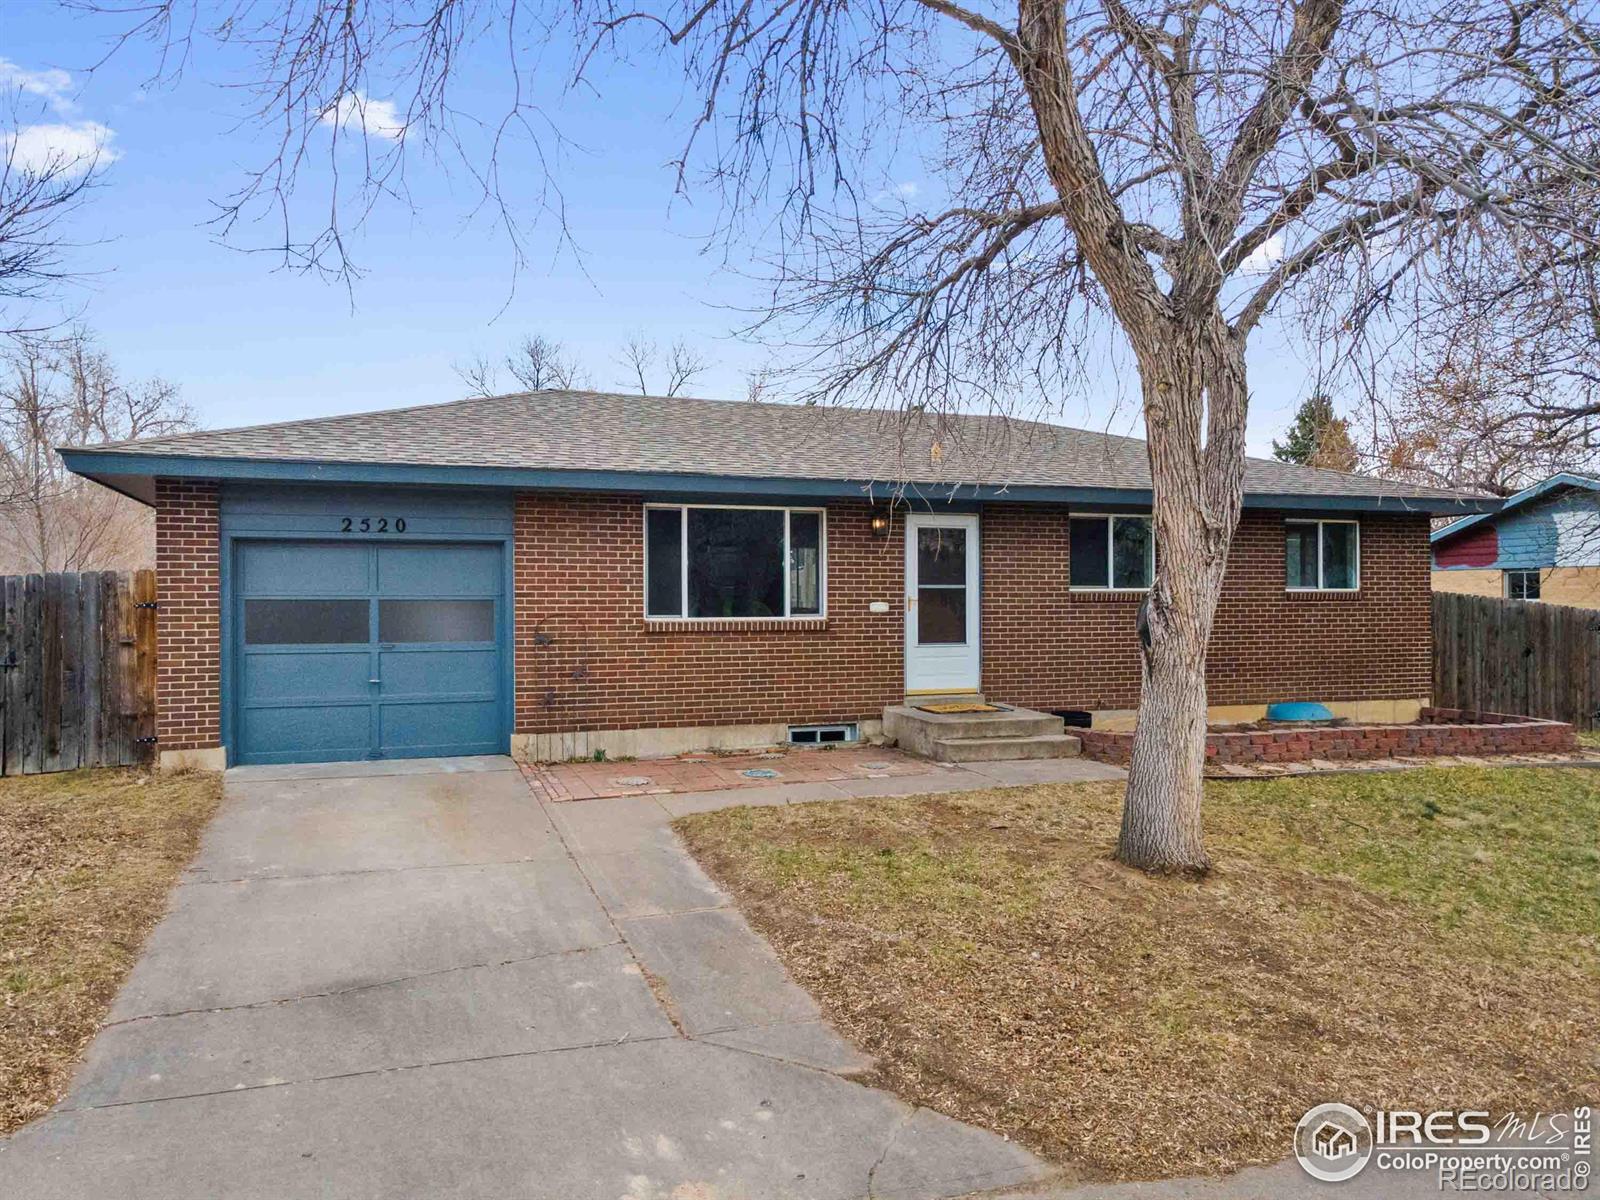 2520  21st Ave Ct, greeley MLS: 4567891004920 Beds: 2 Baths: 2 Price: $355,000